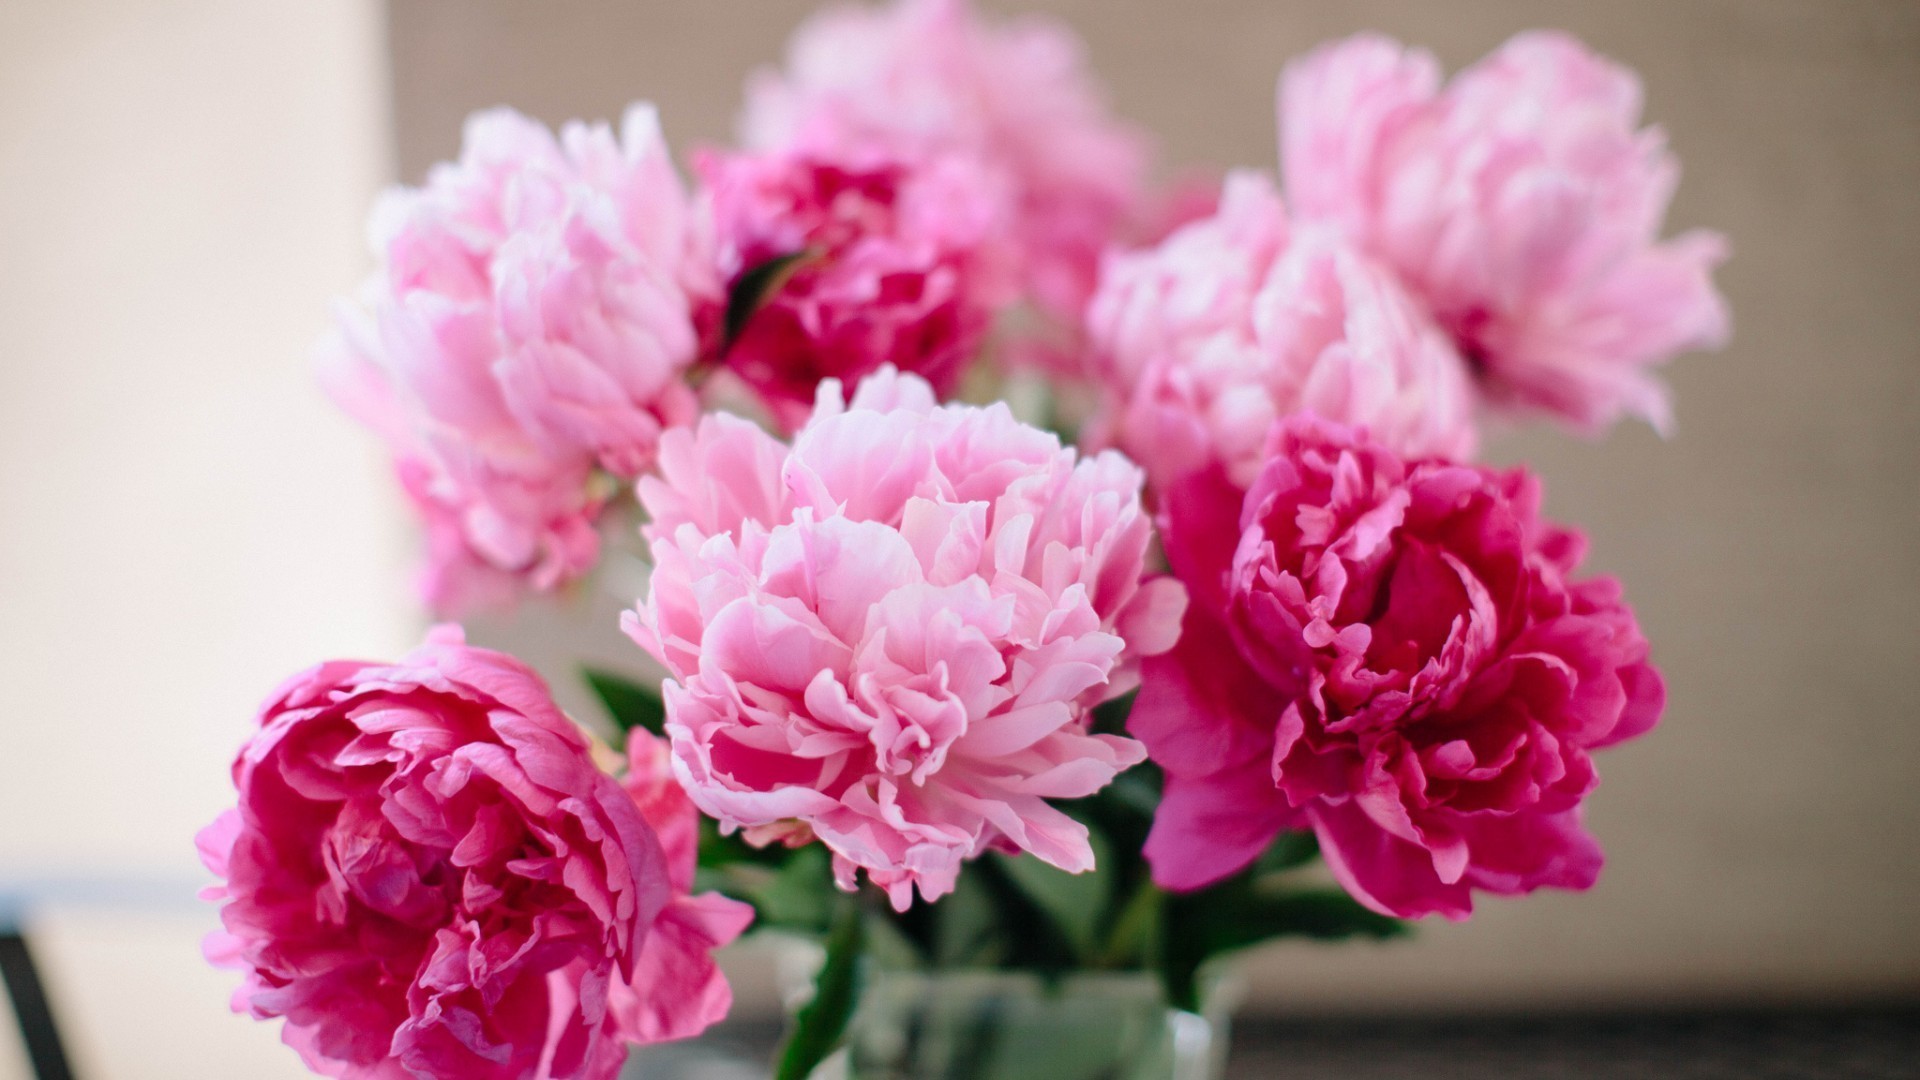 1920x1080 1920x1180 A bouquet of blue Flowers vase of pink peonies. Desktop wallpapers  for free.